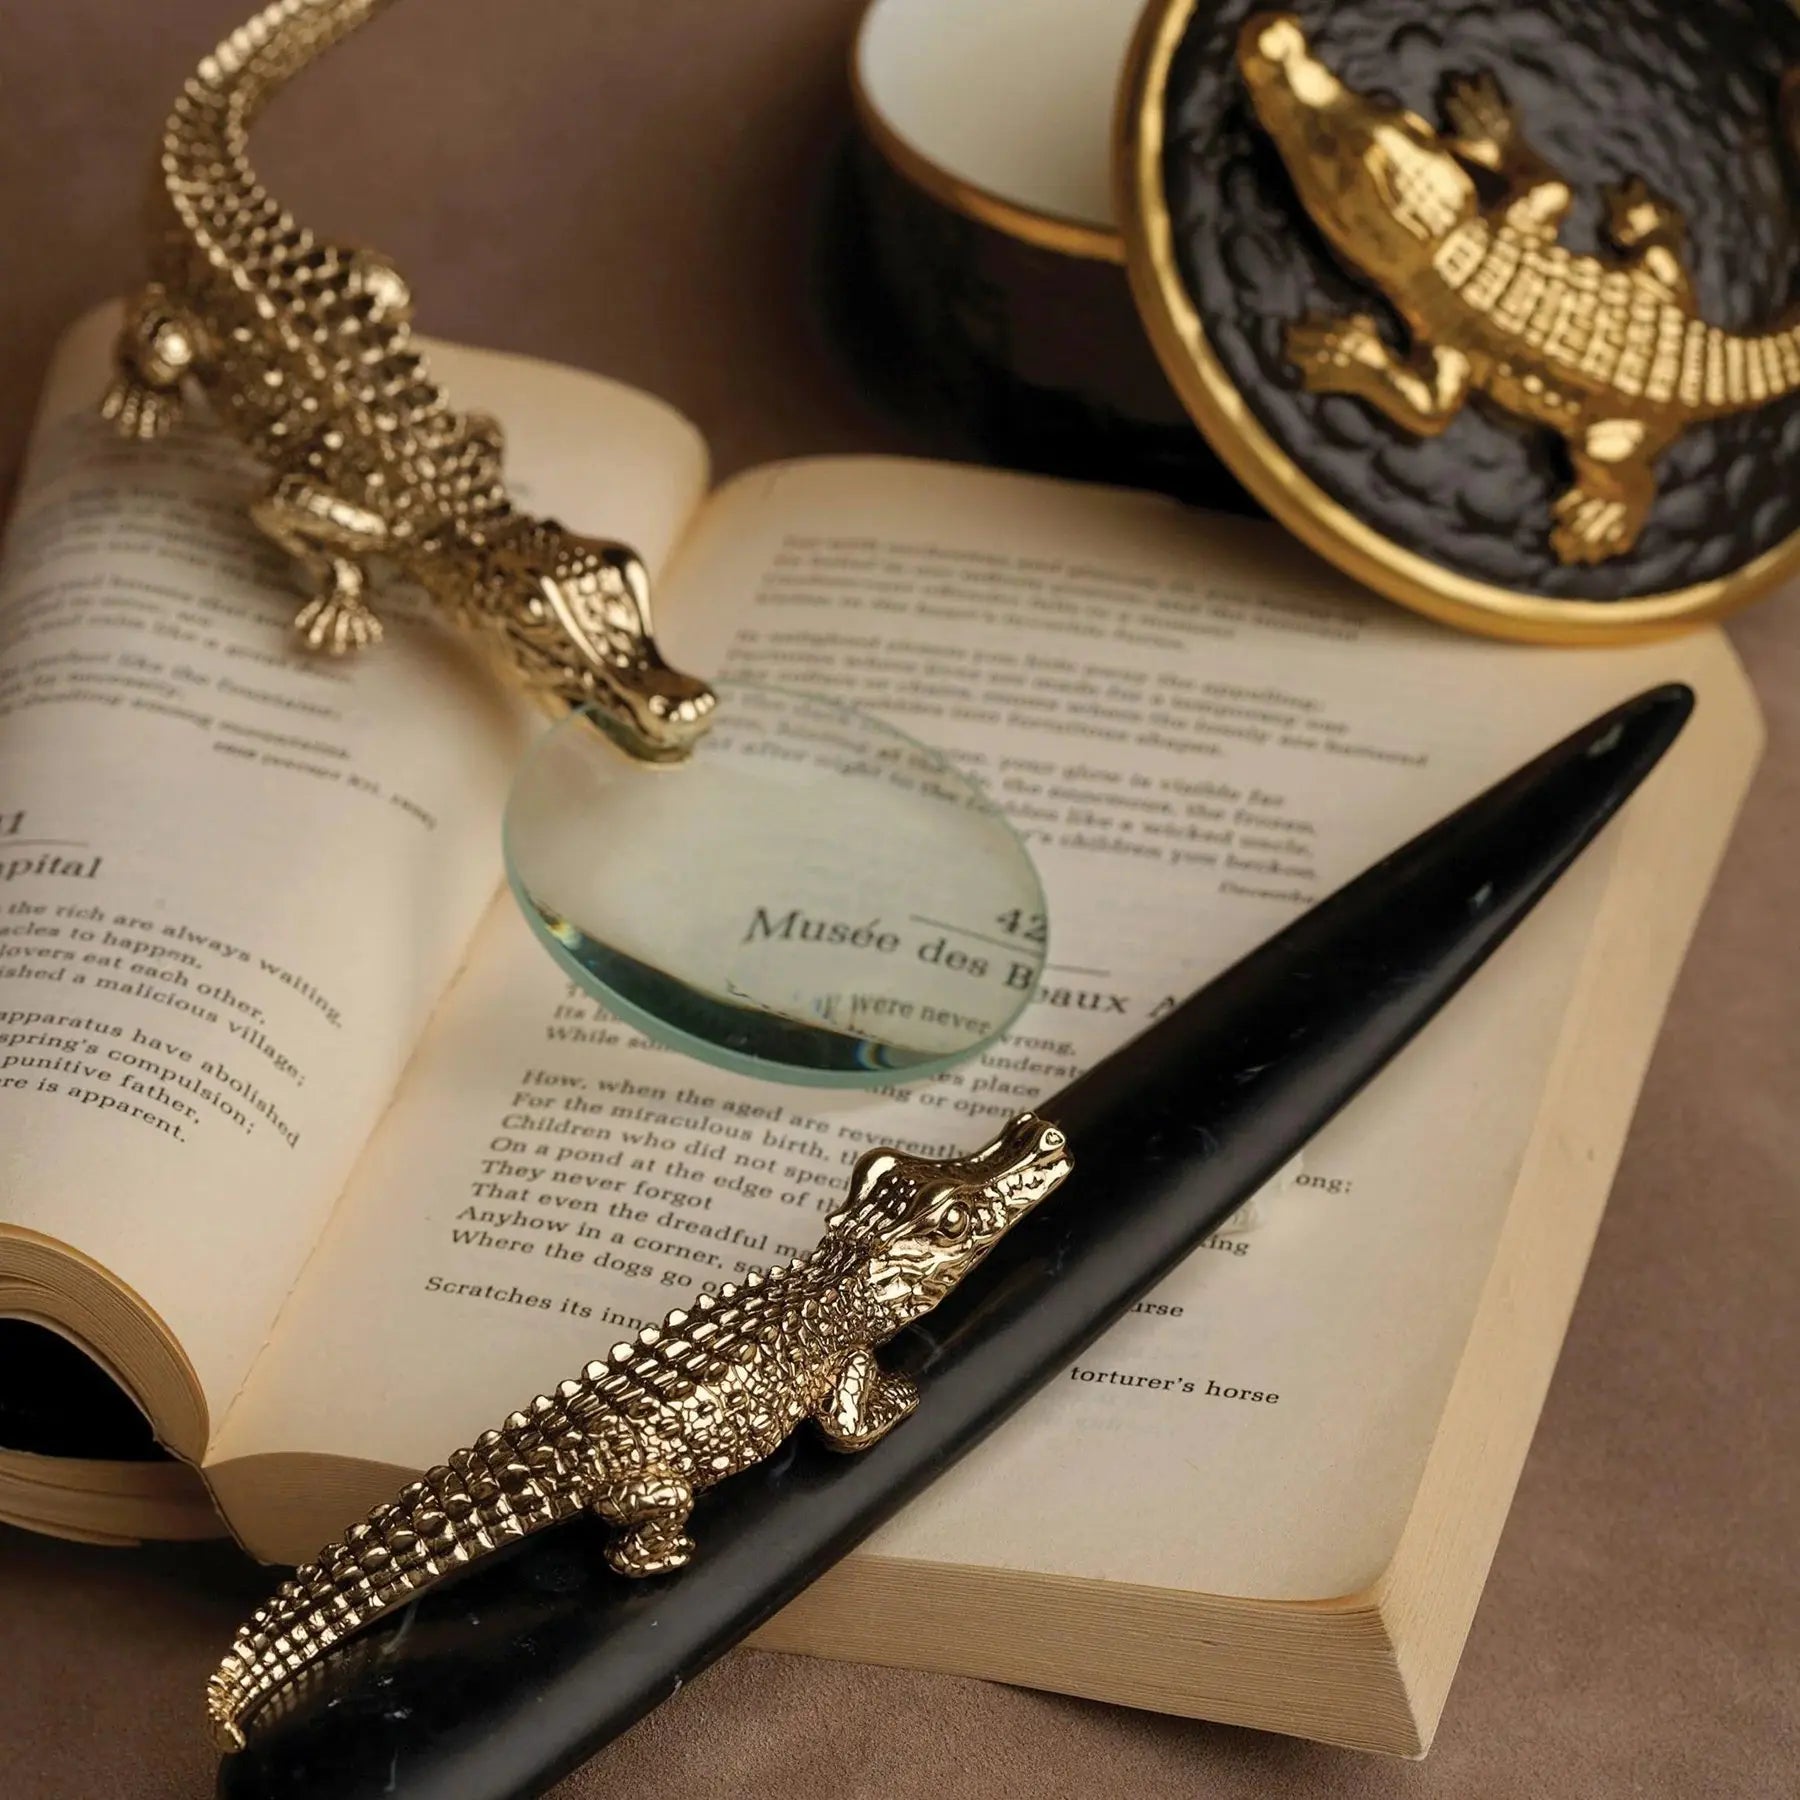 L'Objet Crocodile Letter Opener and Magnifying glass on a book in a room